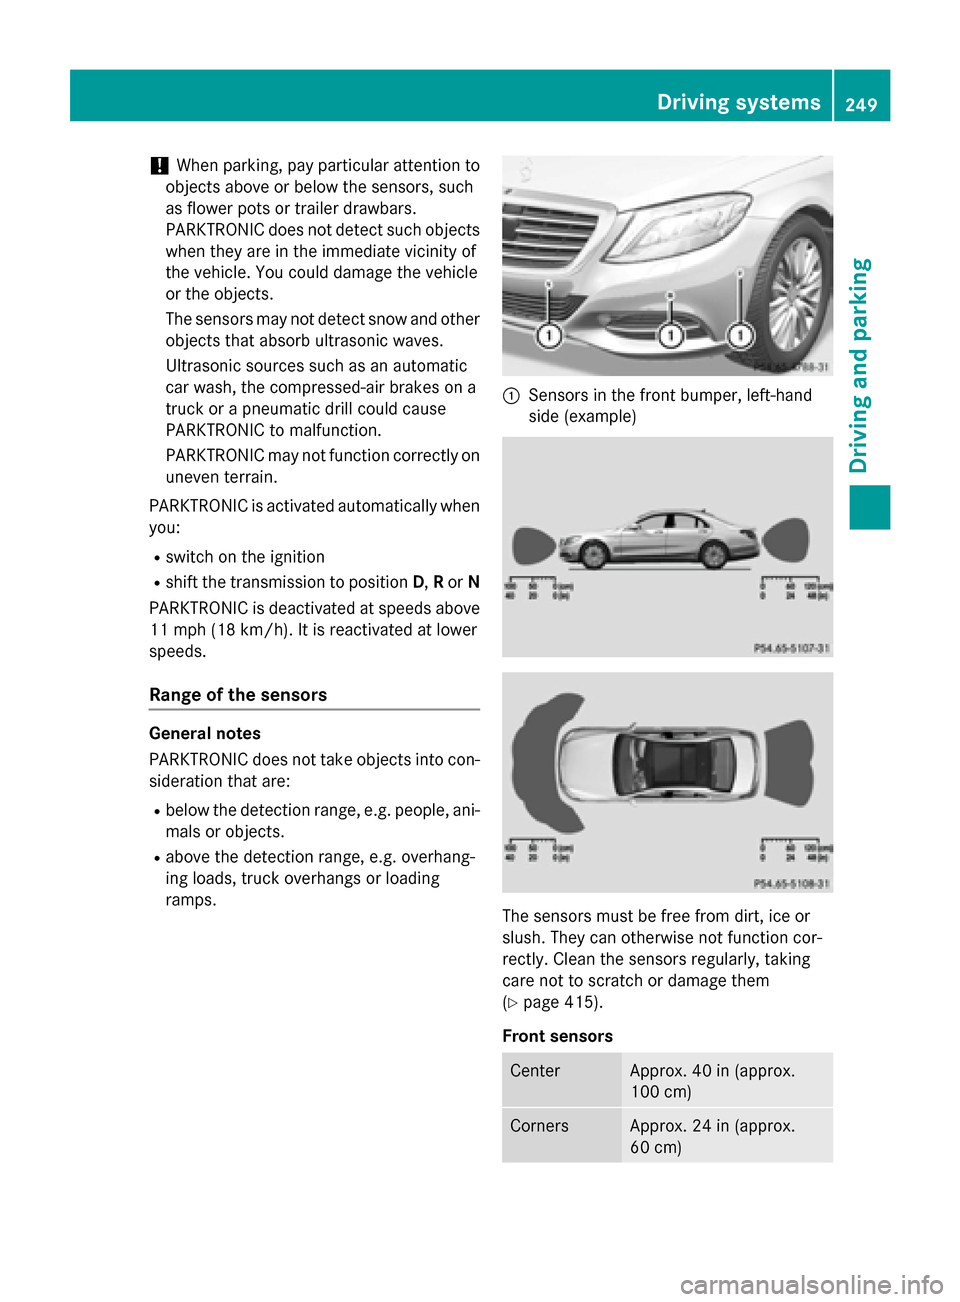 MERCEDES-BENZ S-Class 2015 W222 Owners Manual !
When parking, pay particular attention to
objects above or below the sensors, such
as flower pots or trailer drawbars.
PARKTRONIC does not detect such objects
when they are in the immediate vicinity